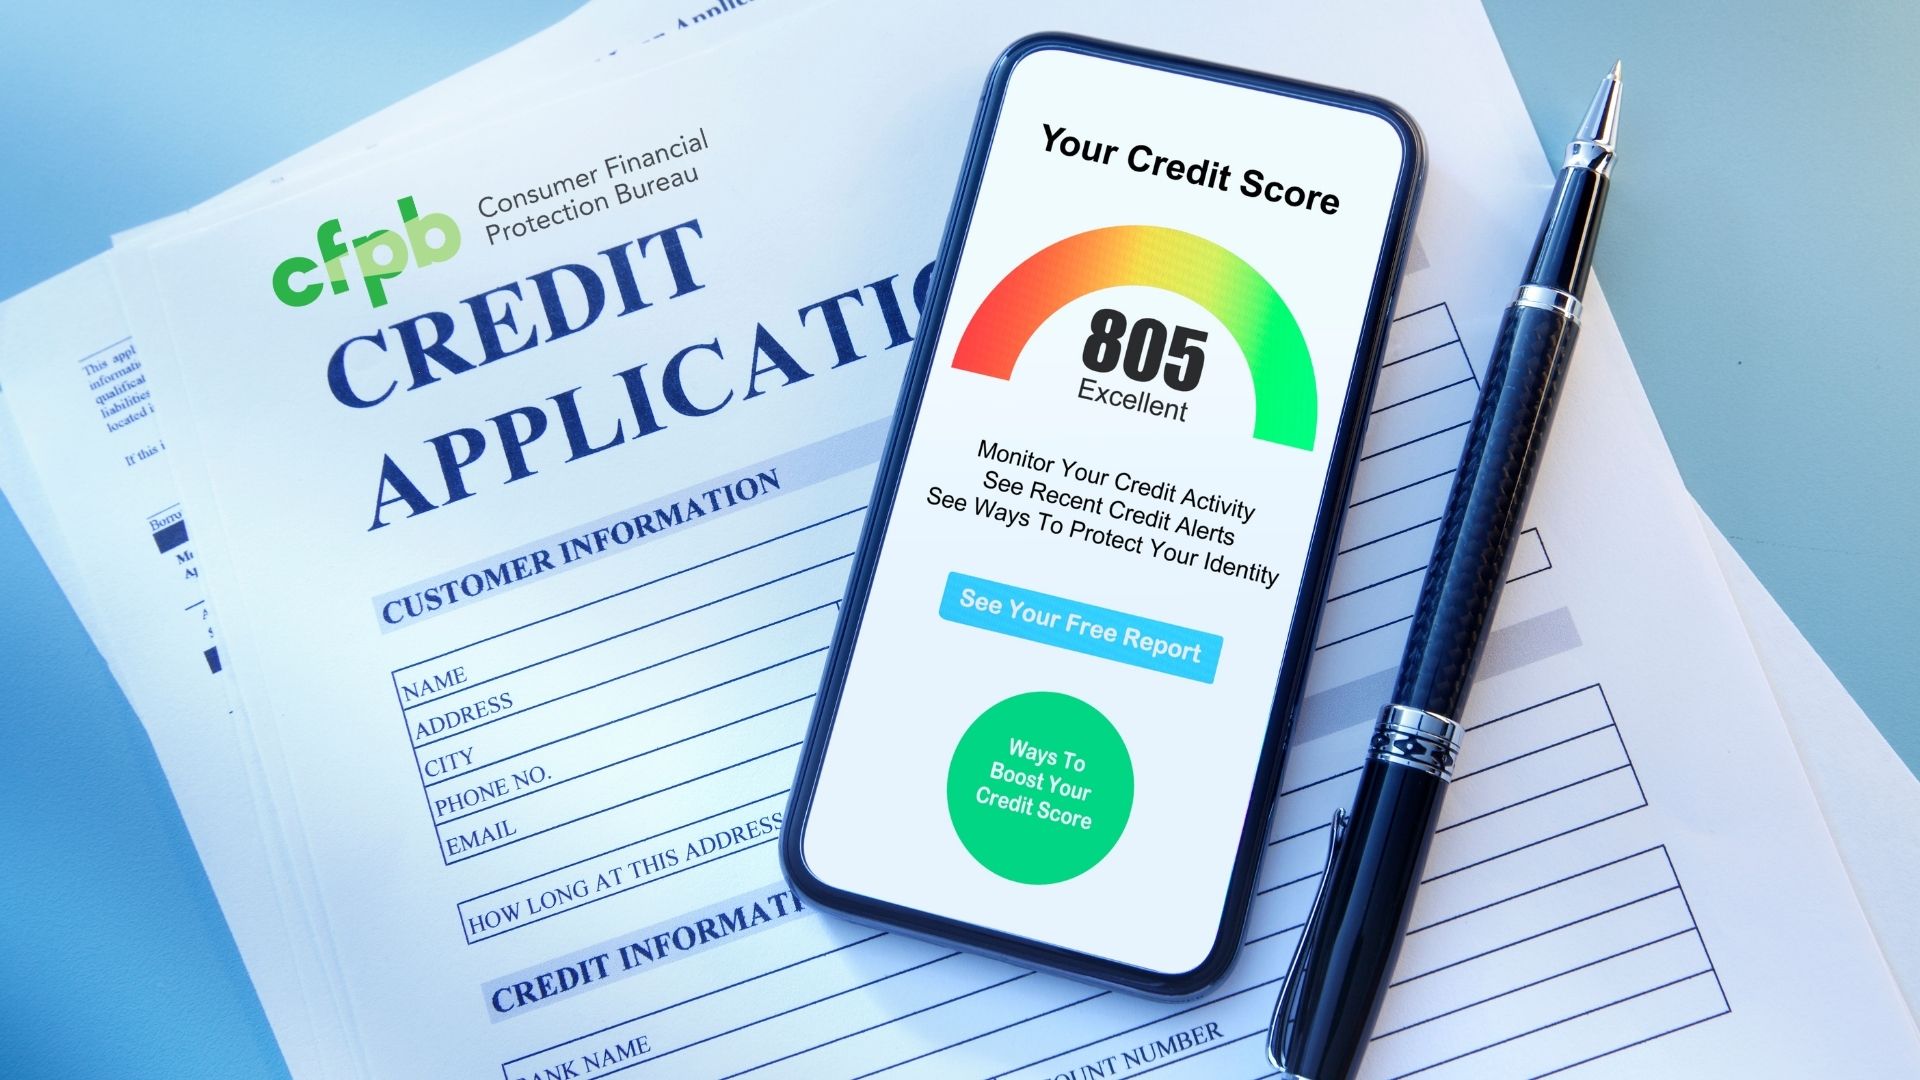 CFPB-BORROWERS-ENTITLED-TO-EXPLANATION-FOR-CREDIT-DENIAL-EVEN-IF-CREDIT-DECISIONS-ARE-BASED-ON-COMPLEX-ALGORITHMS